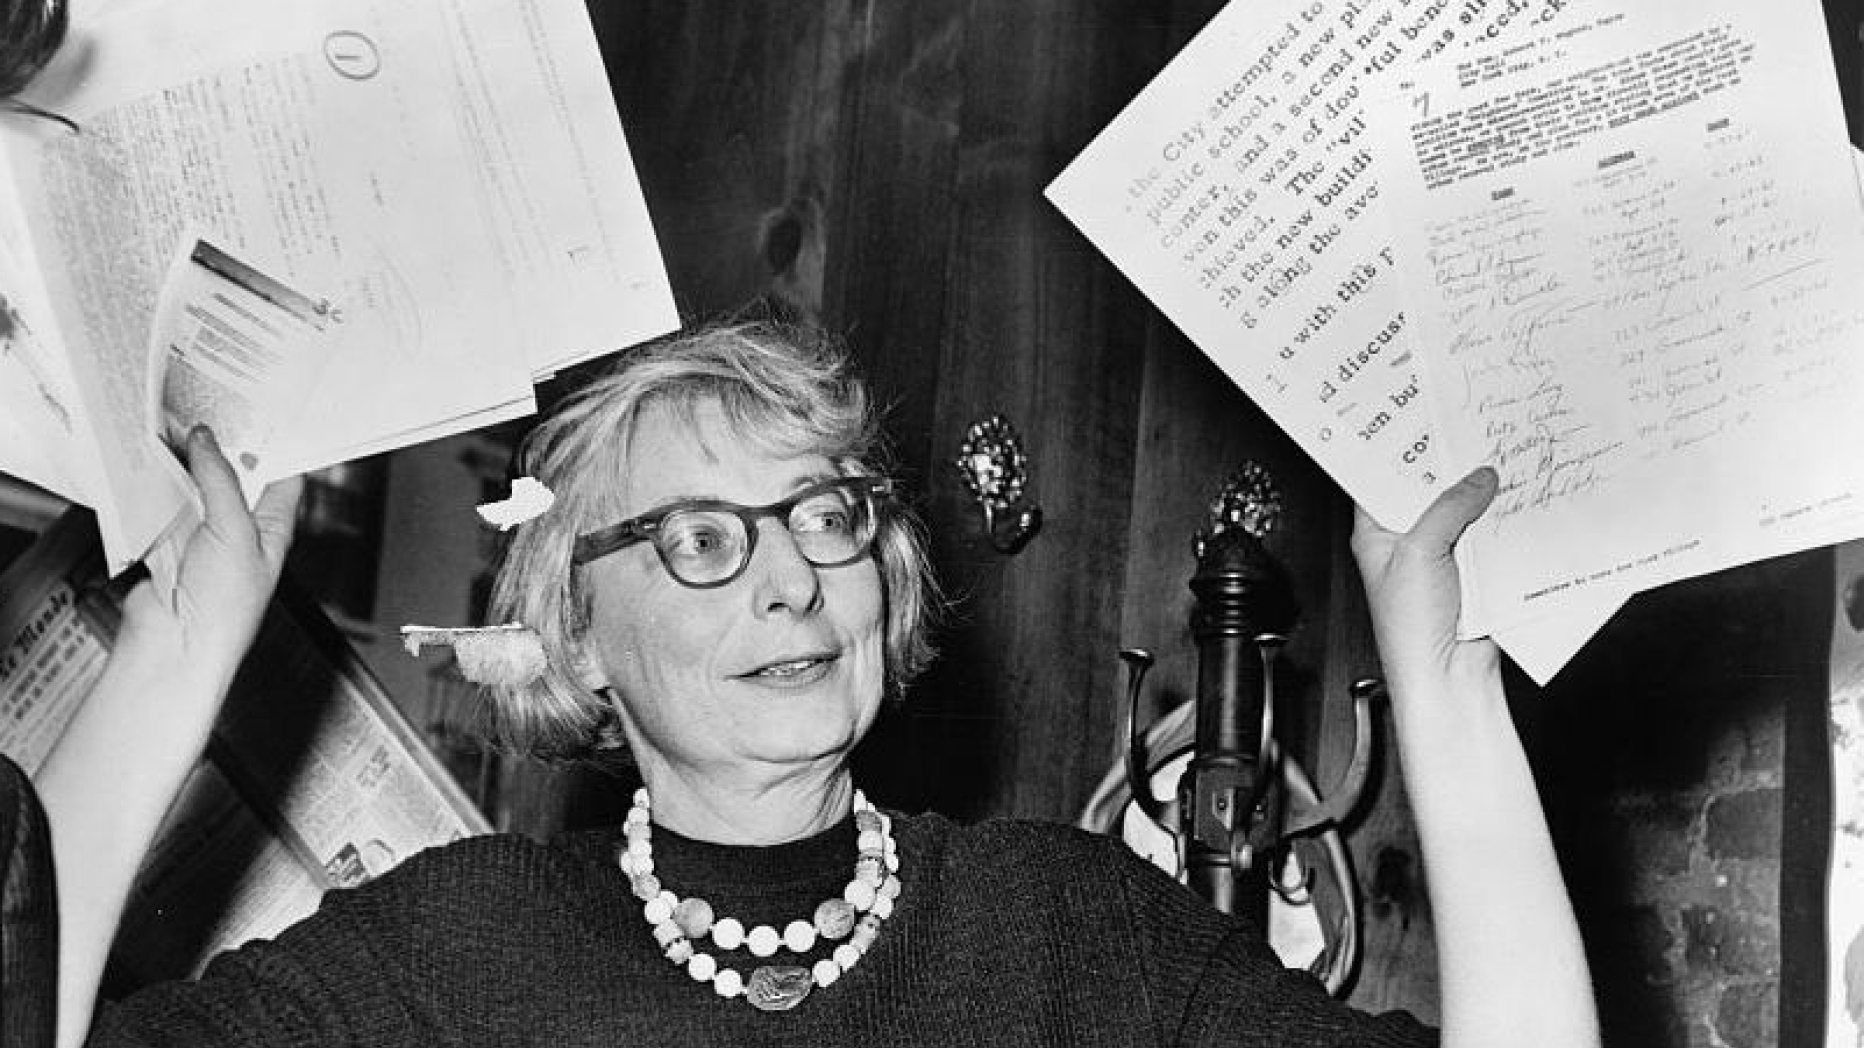 Photograph of Jane Jacobs